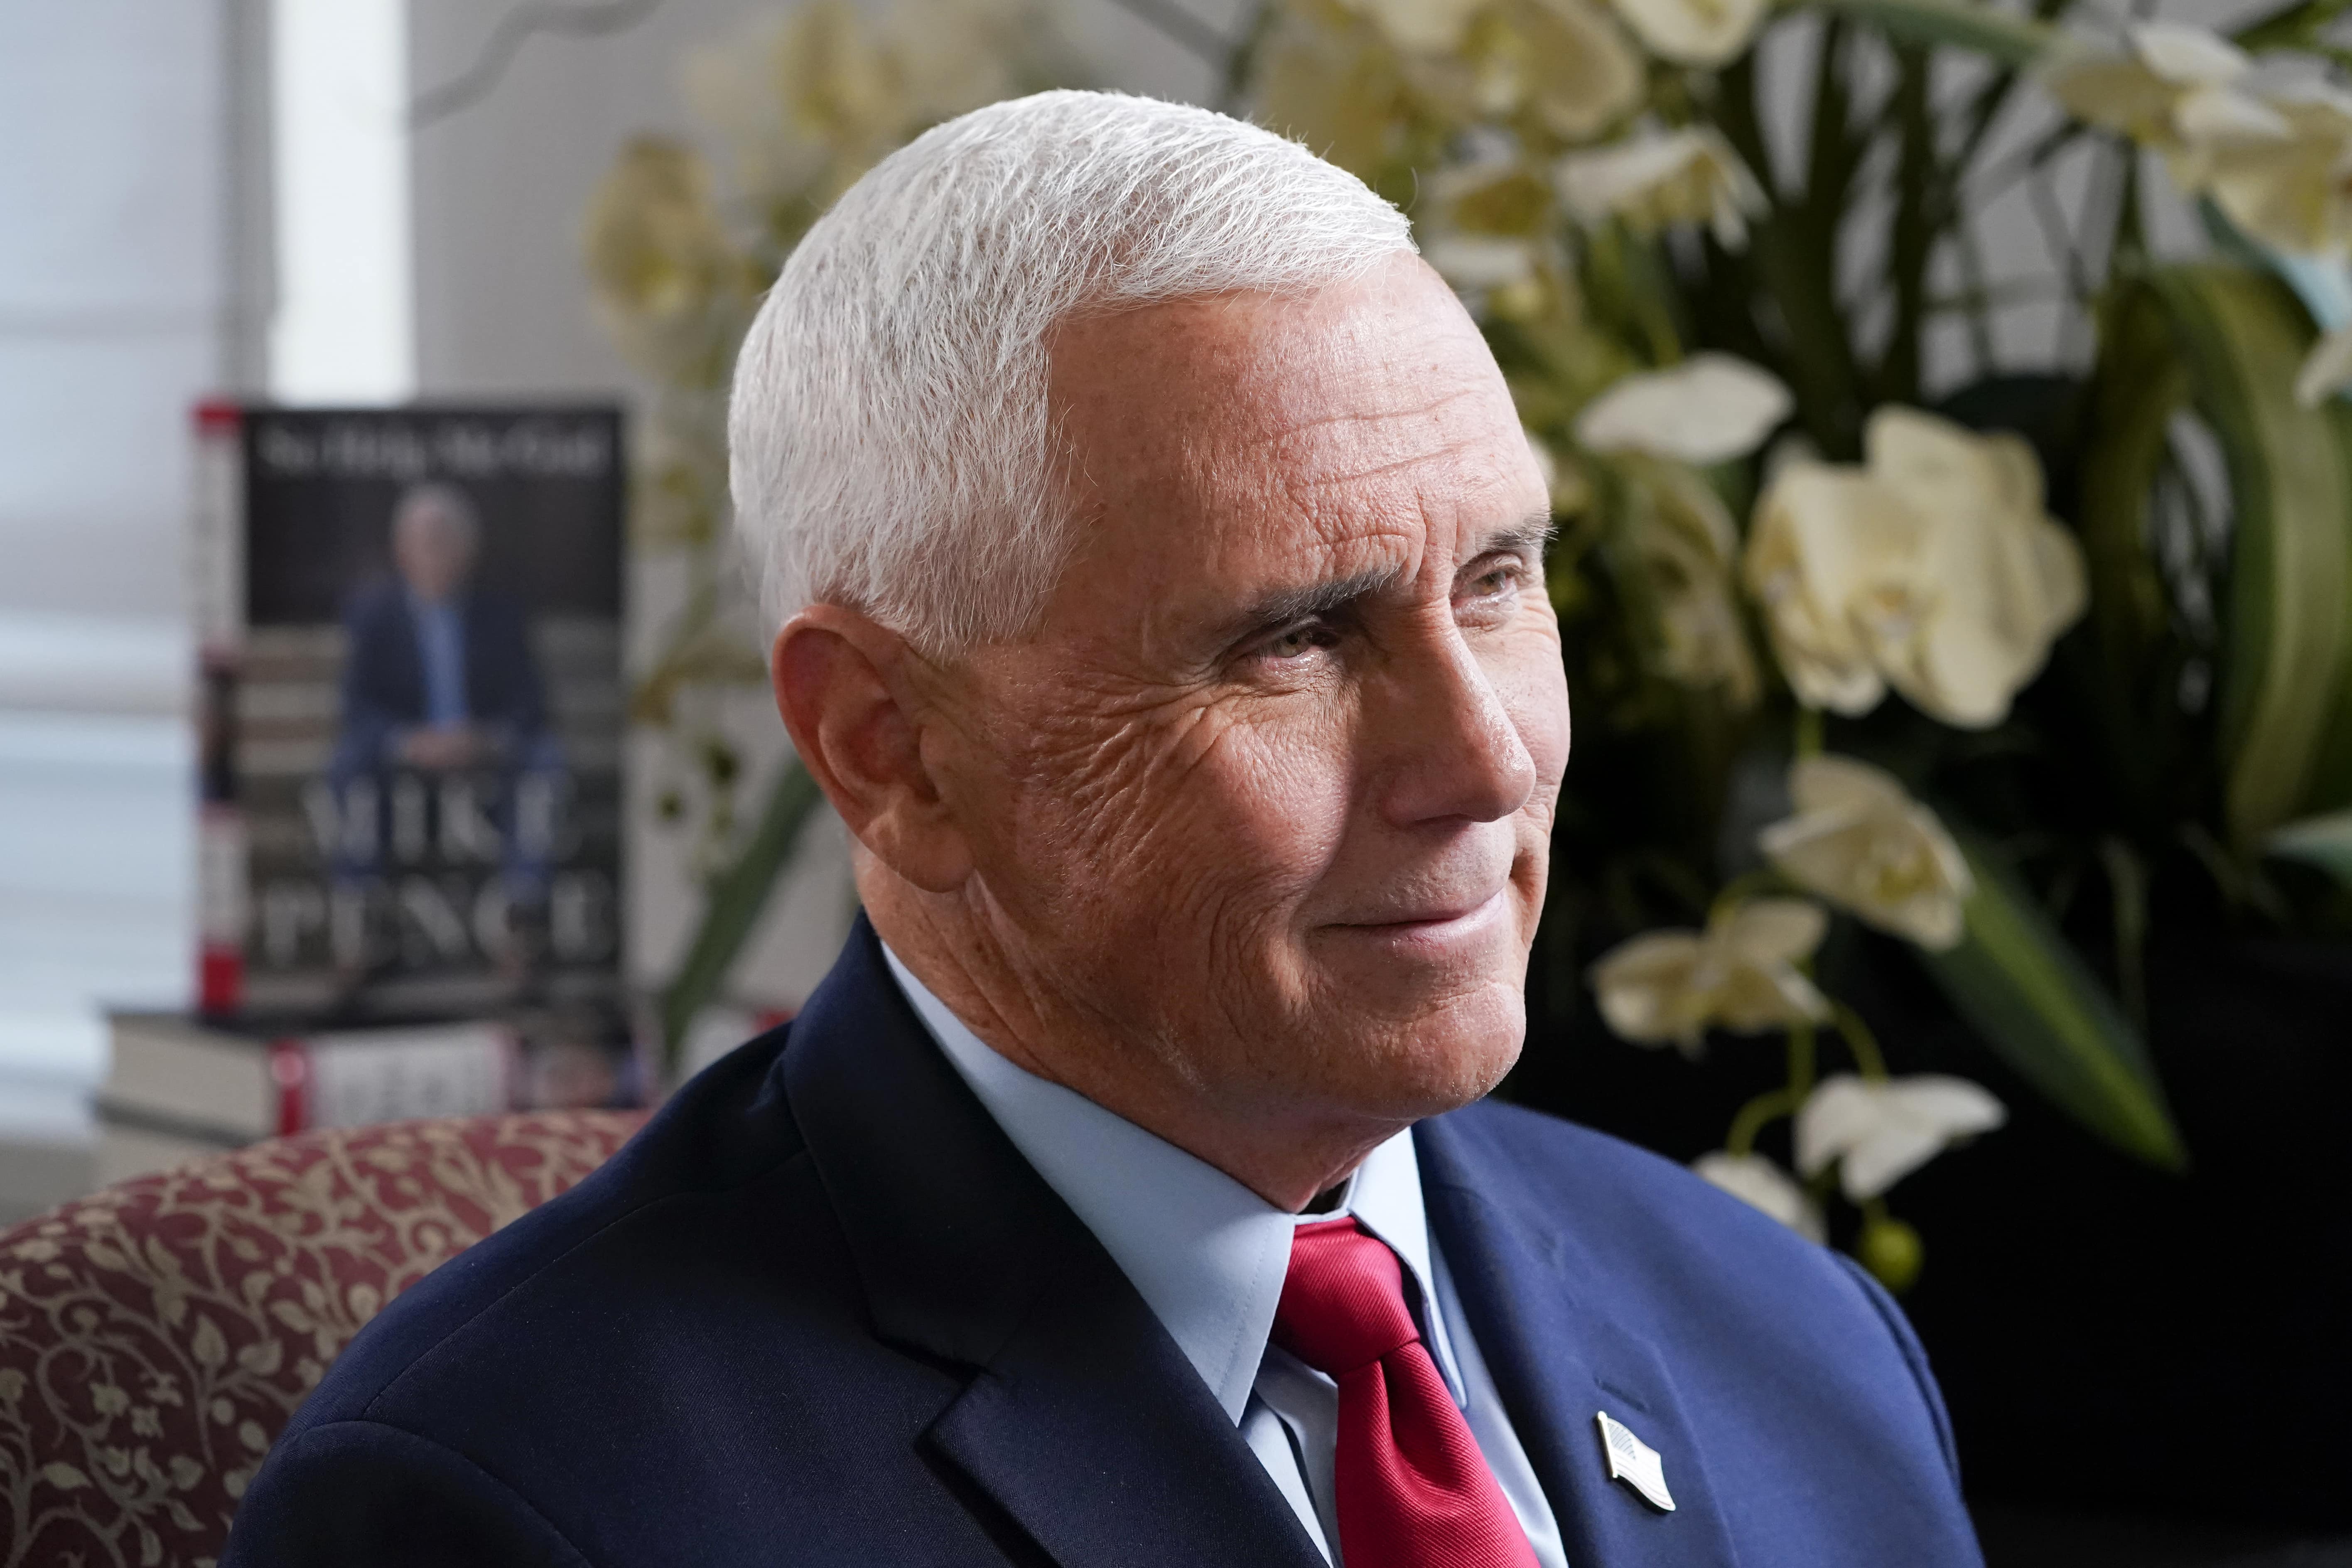 The AP Interview: Pence Says Voters Want New Leadership